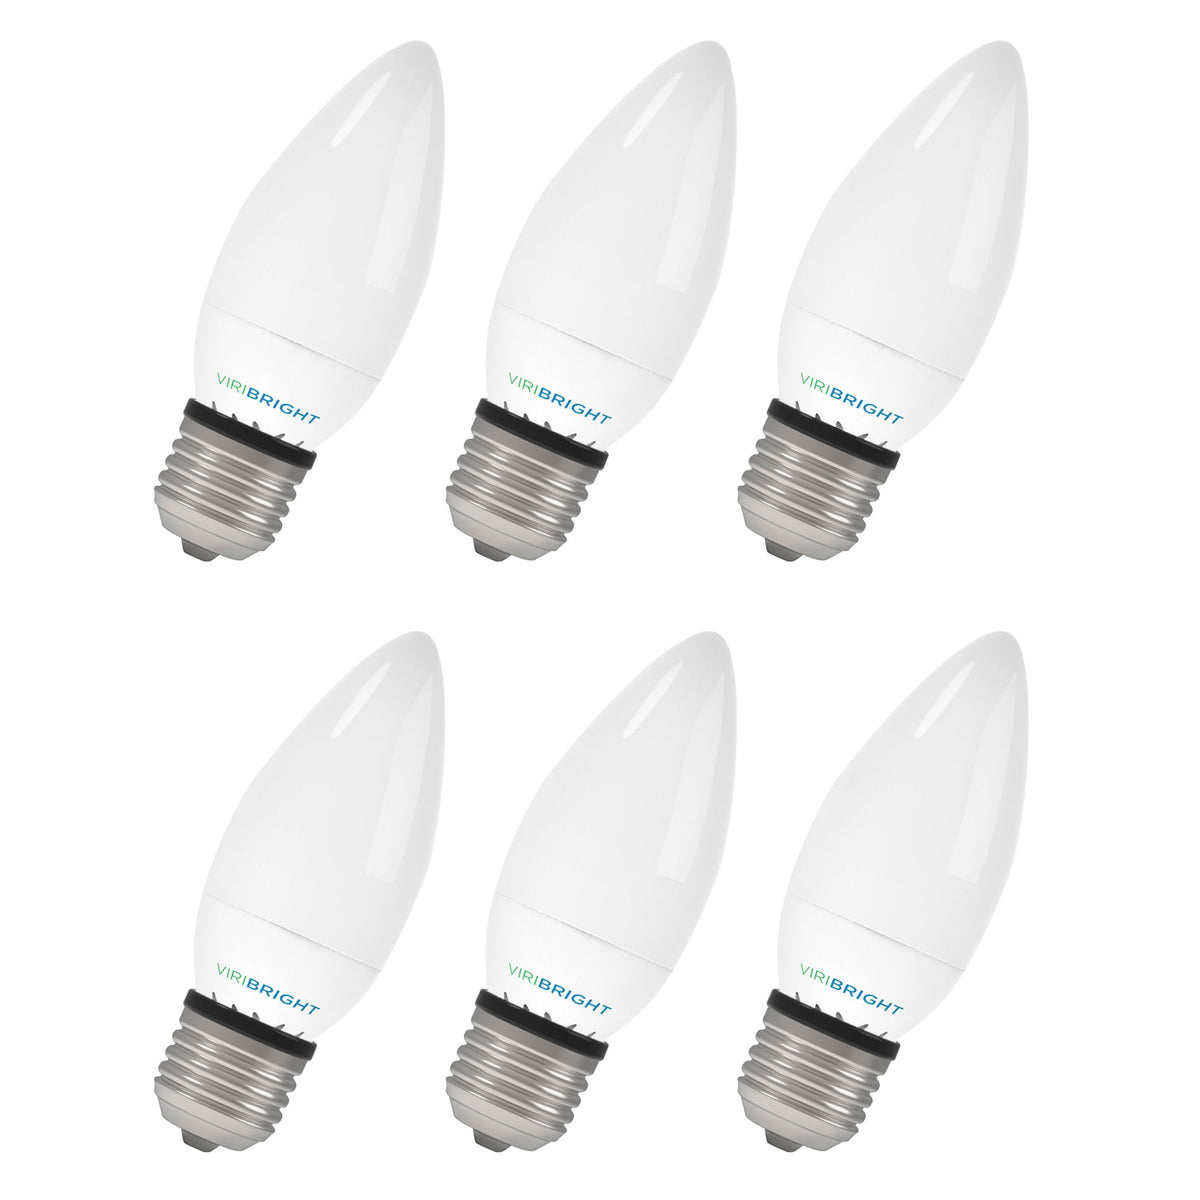 Picture of Viribright 750191-6 6500k 3.2W 40W Equivalent Daylight E26 LED Chandelier Bulb - Pack of 6